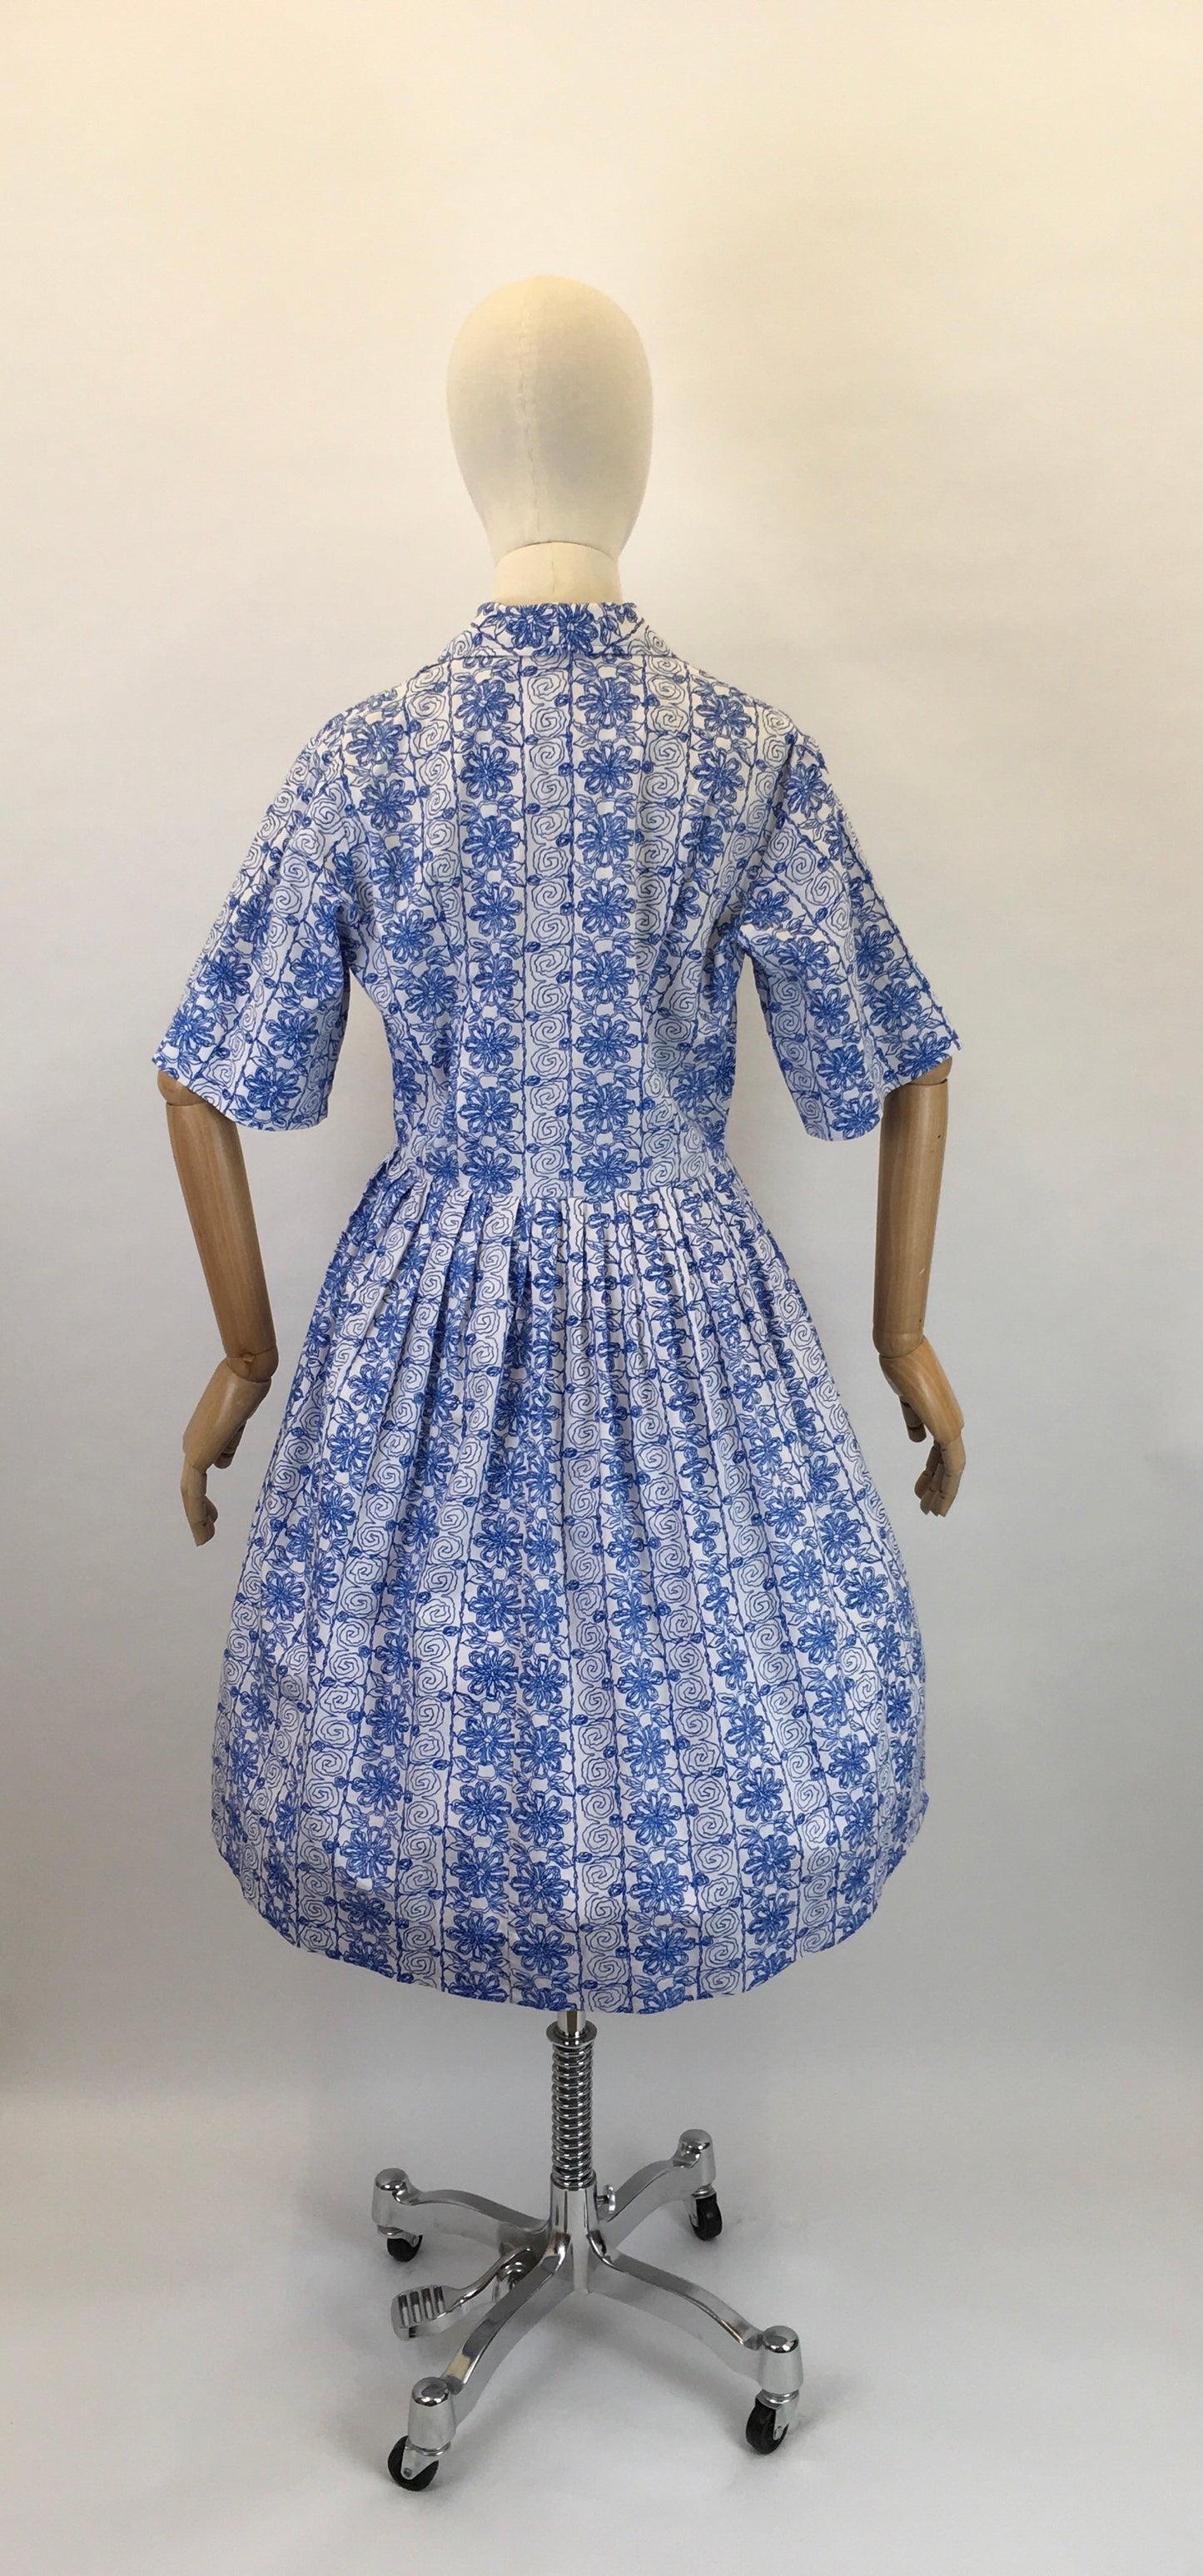 Original 1950s Cotton Day Dress - In a Lovely Cobalt Blue and White Scribble Fabric